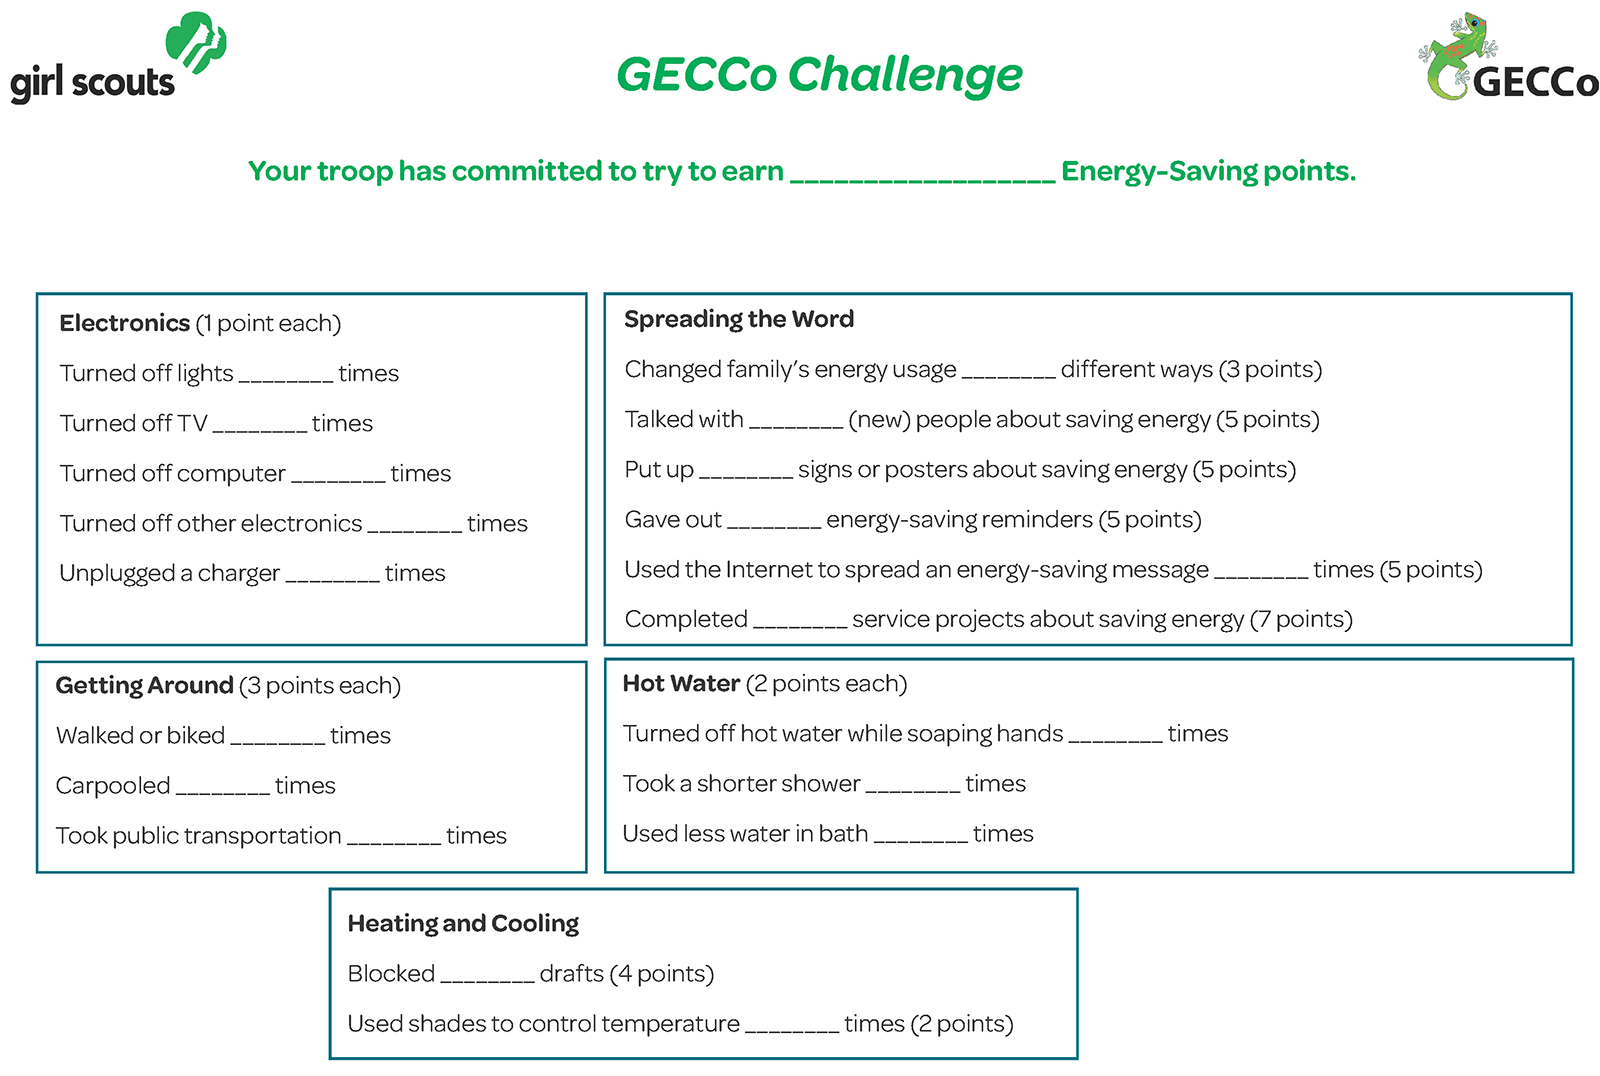 The redesigned pledge sheet for iteration 3